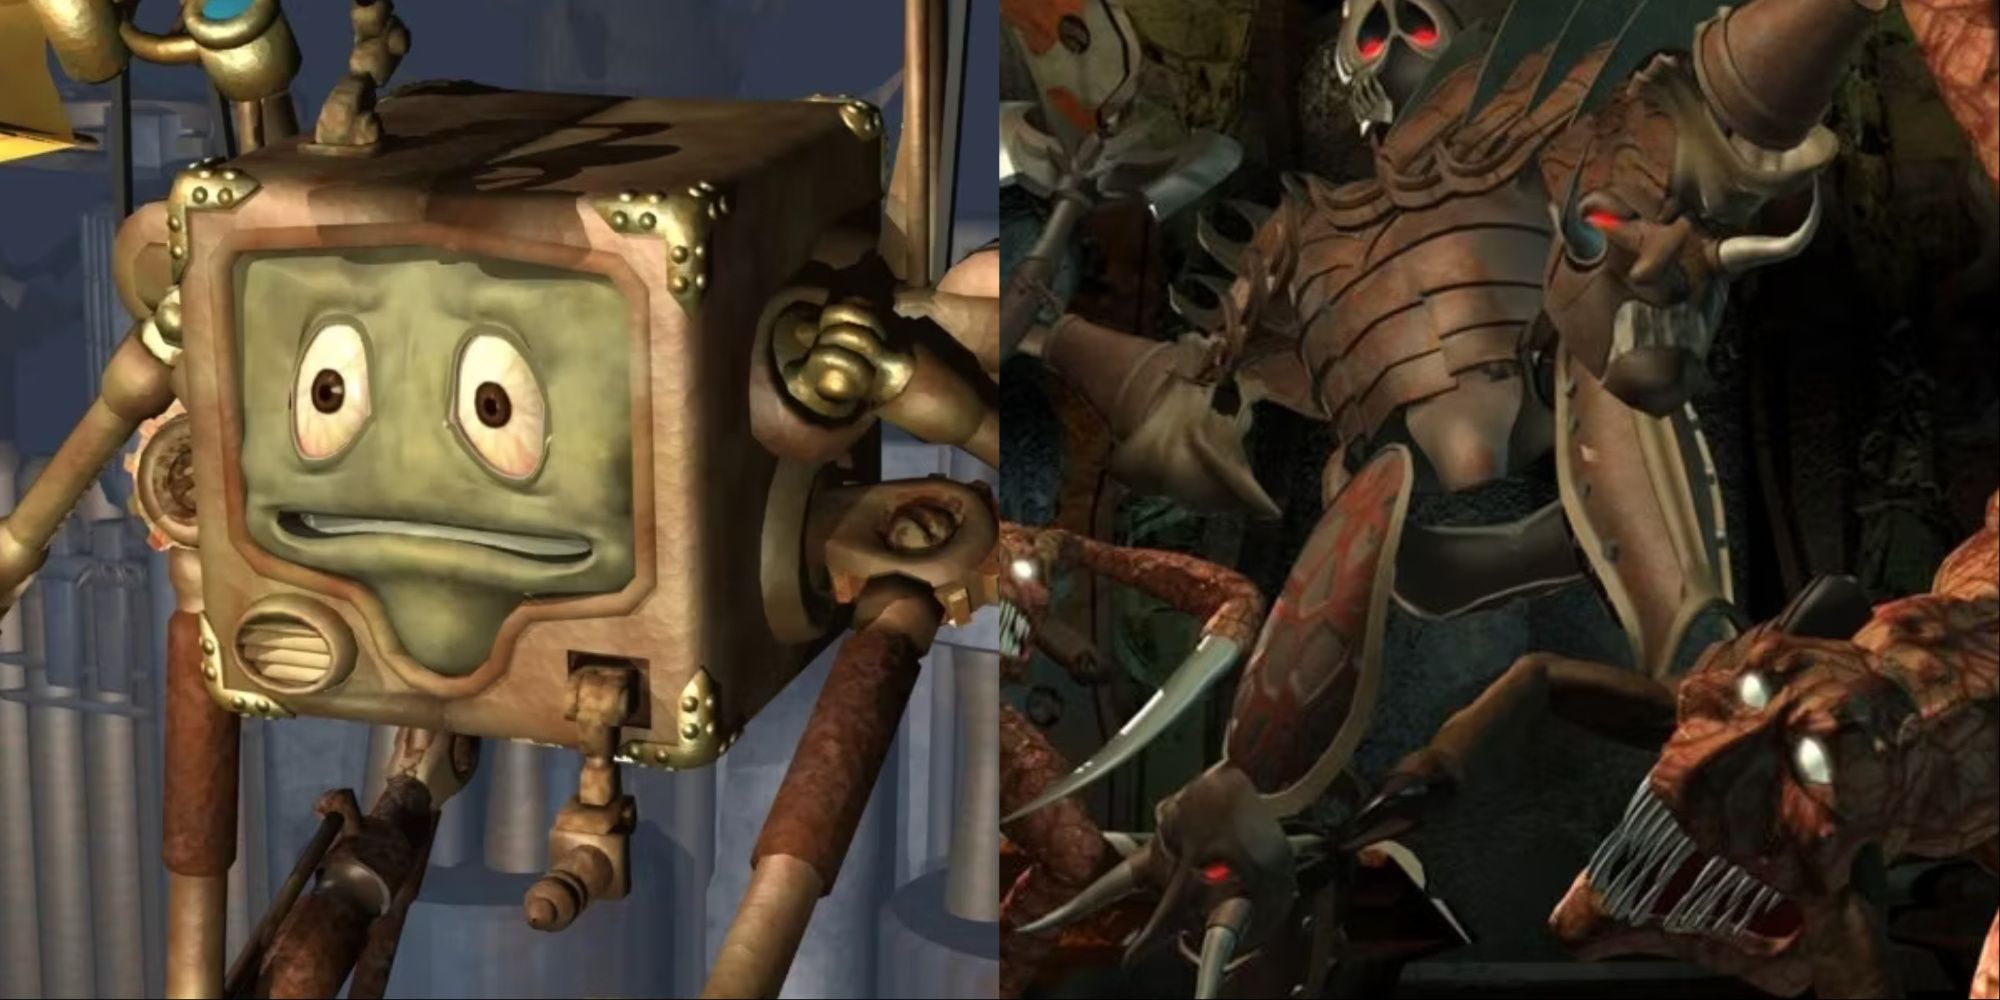 A collage showing two characters from Planescape: Torment.